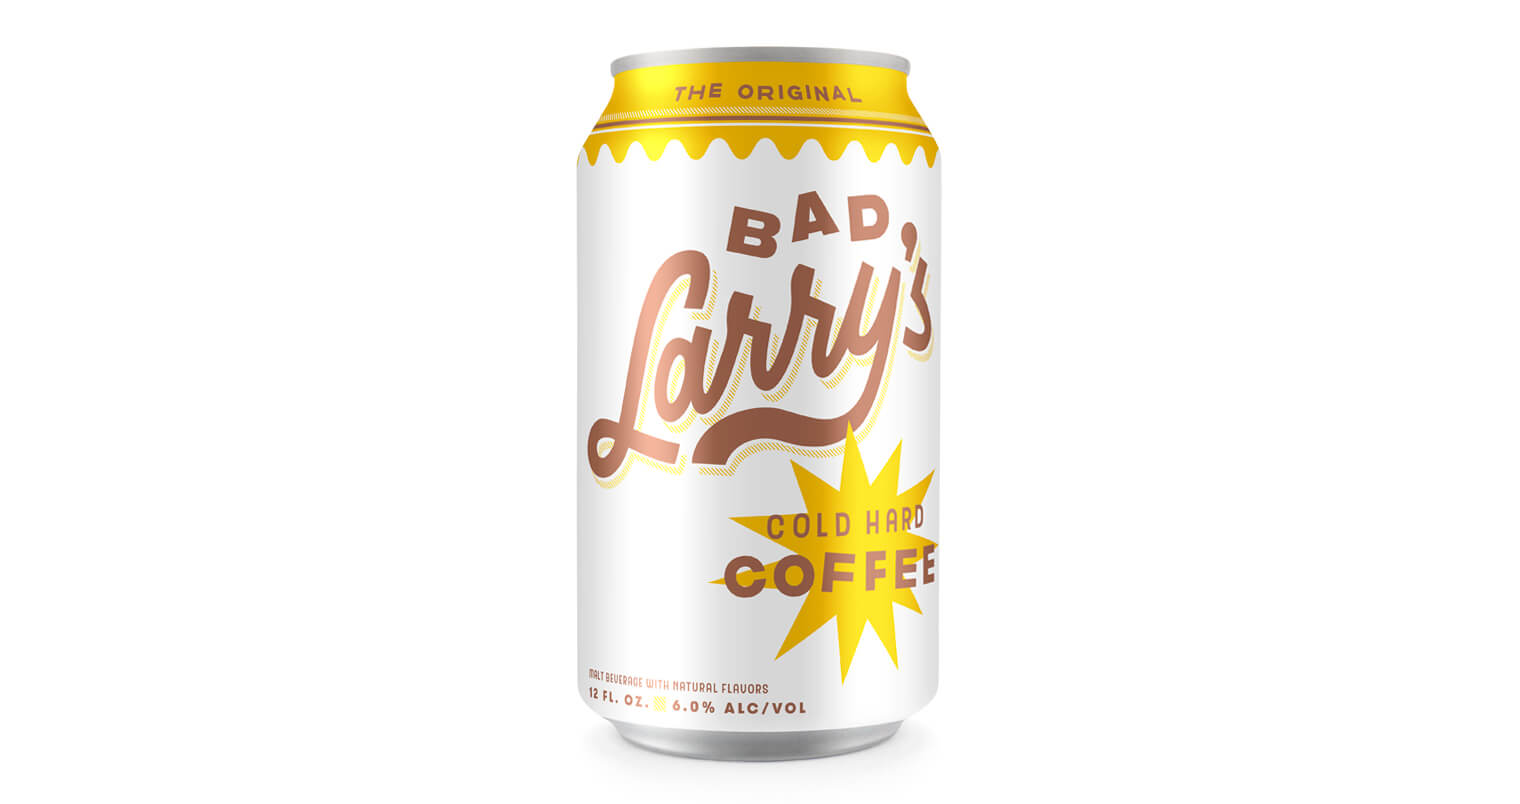 Bad Larry’s Cold Hard Coffee Launches, featured image